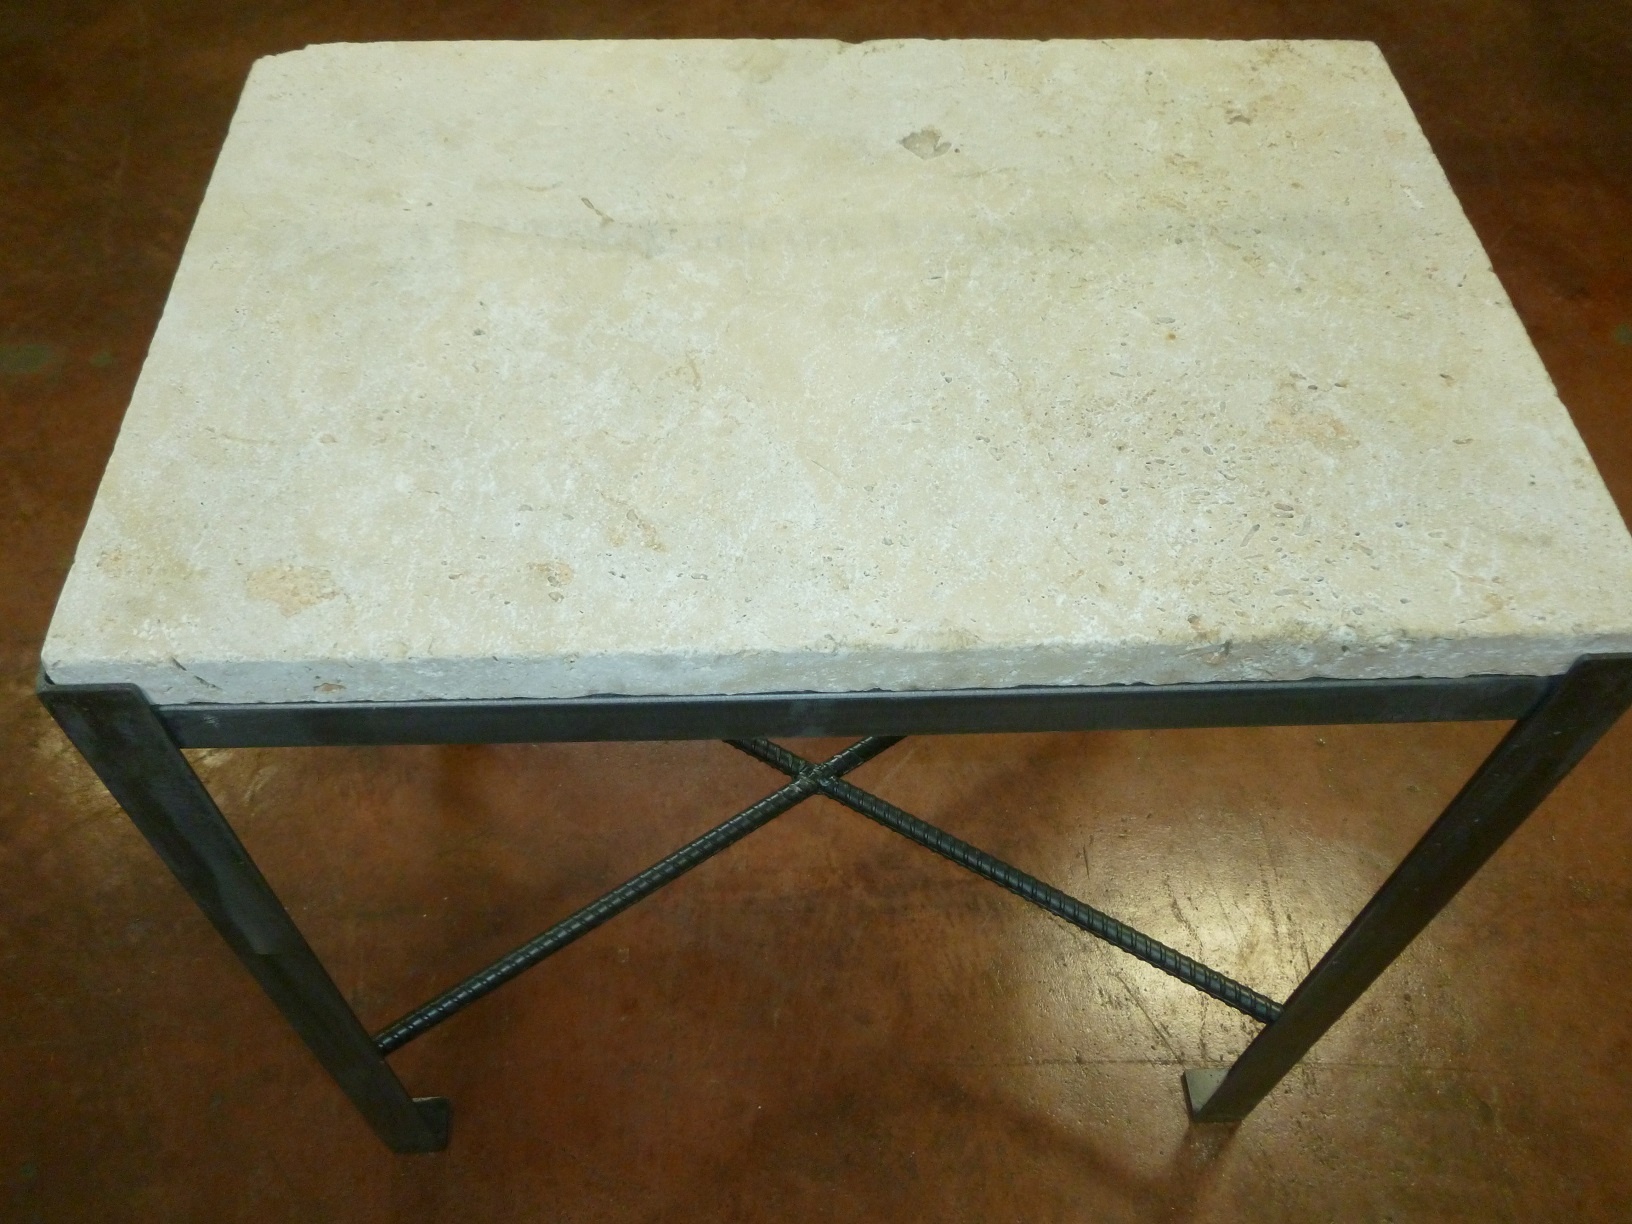 Ferro Designs LLC custom iron end table with a steel finish and a travertine tile top.